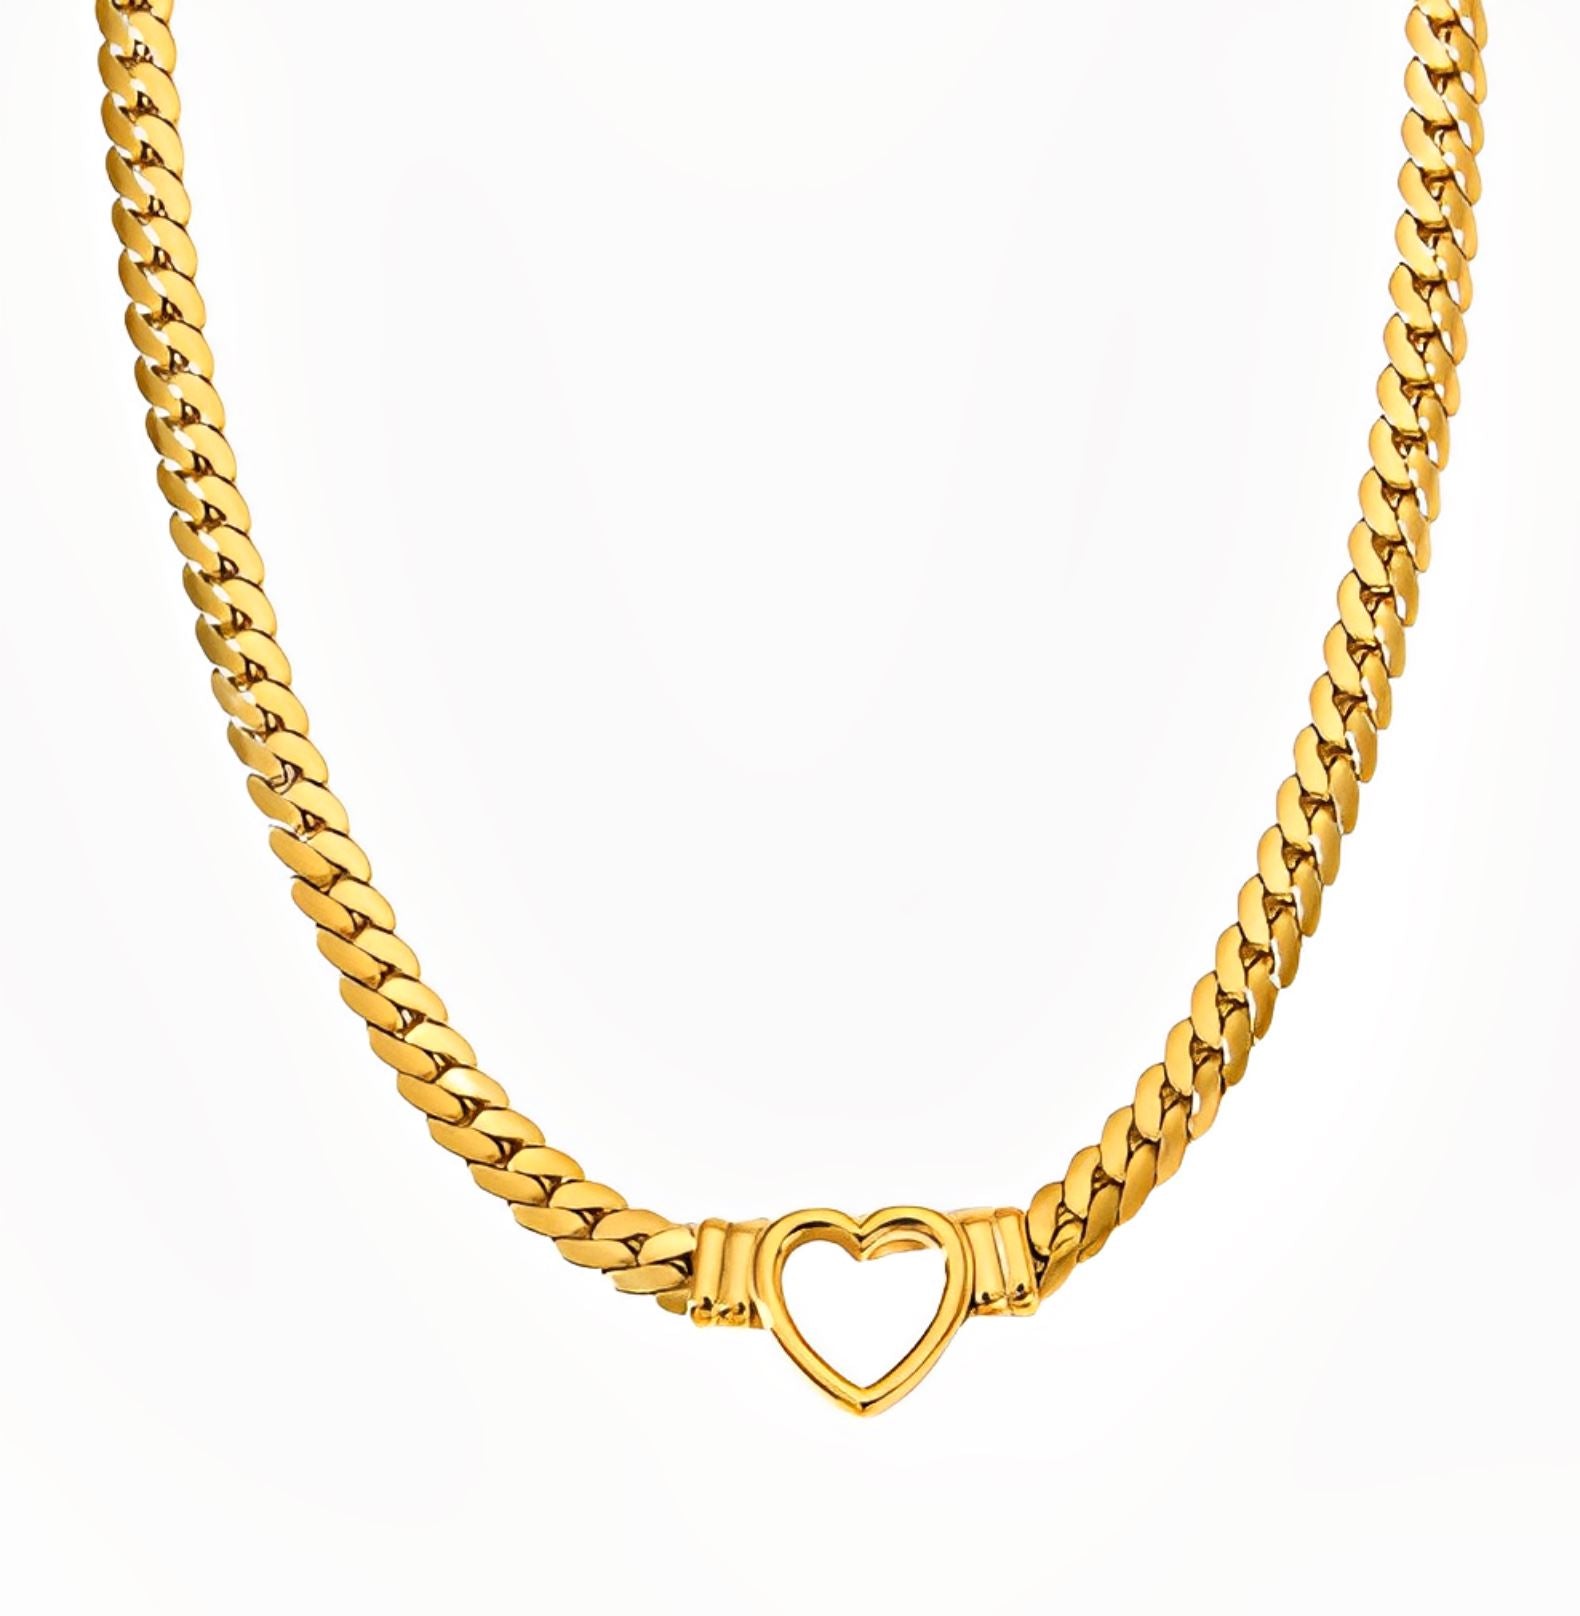 HEART CHOKER NECKLACE neck Yubama Jewelry Online Store - The Elegant Designs of Gold and Silver ! 